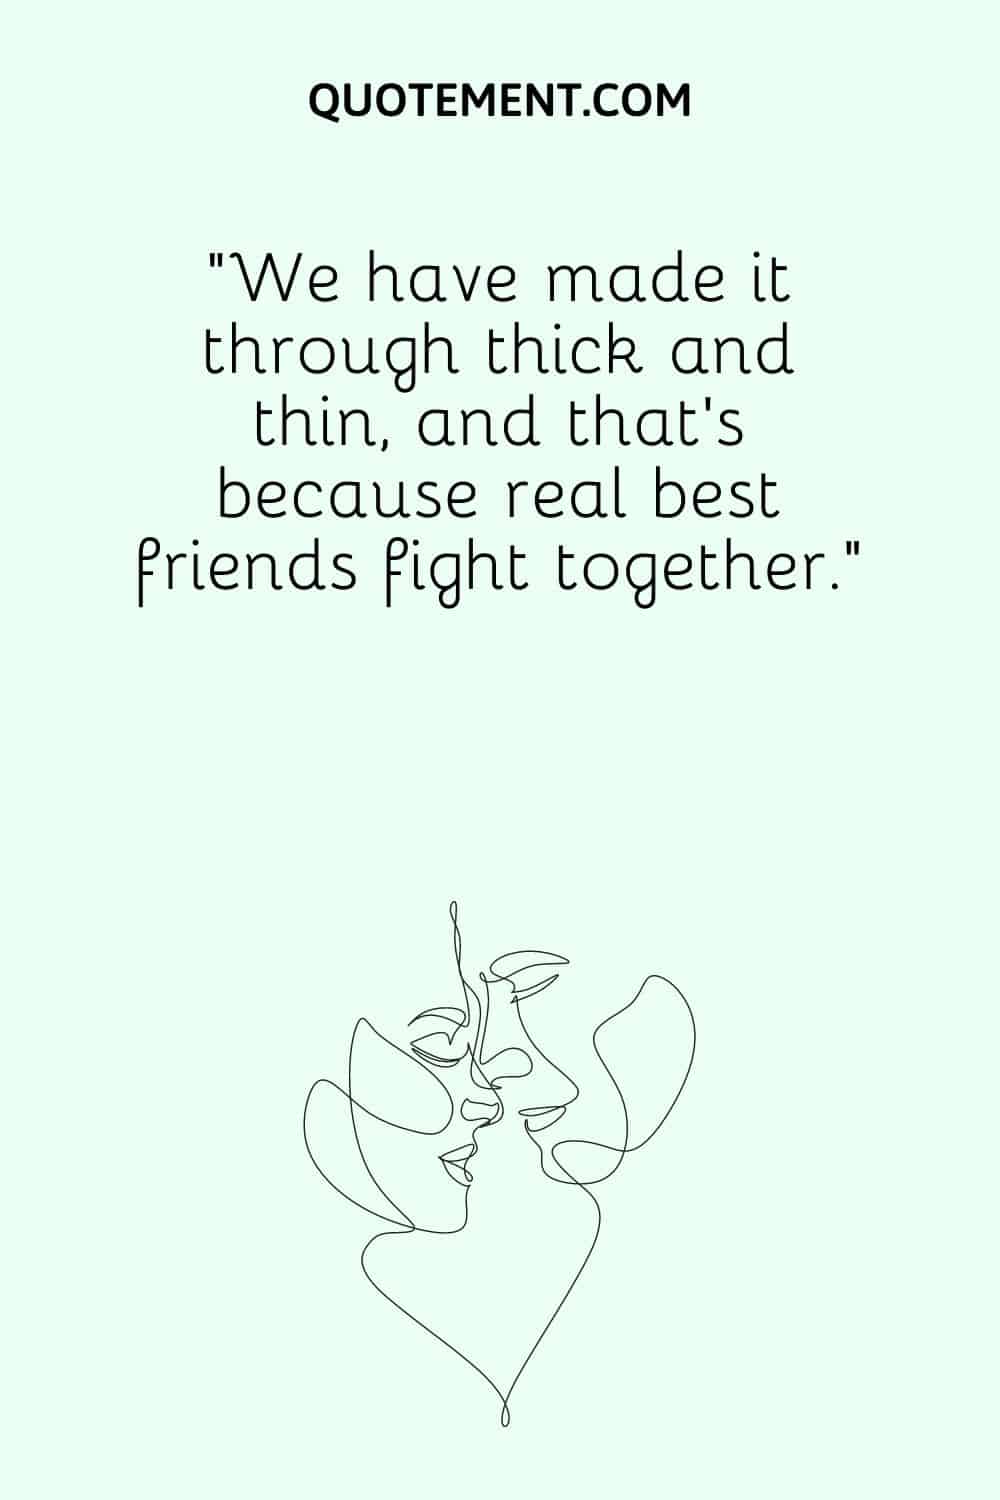 “We have made it through thick and thin, and that’s because real best friends fight together.”